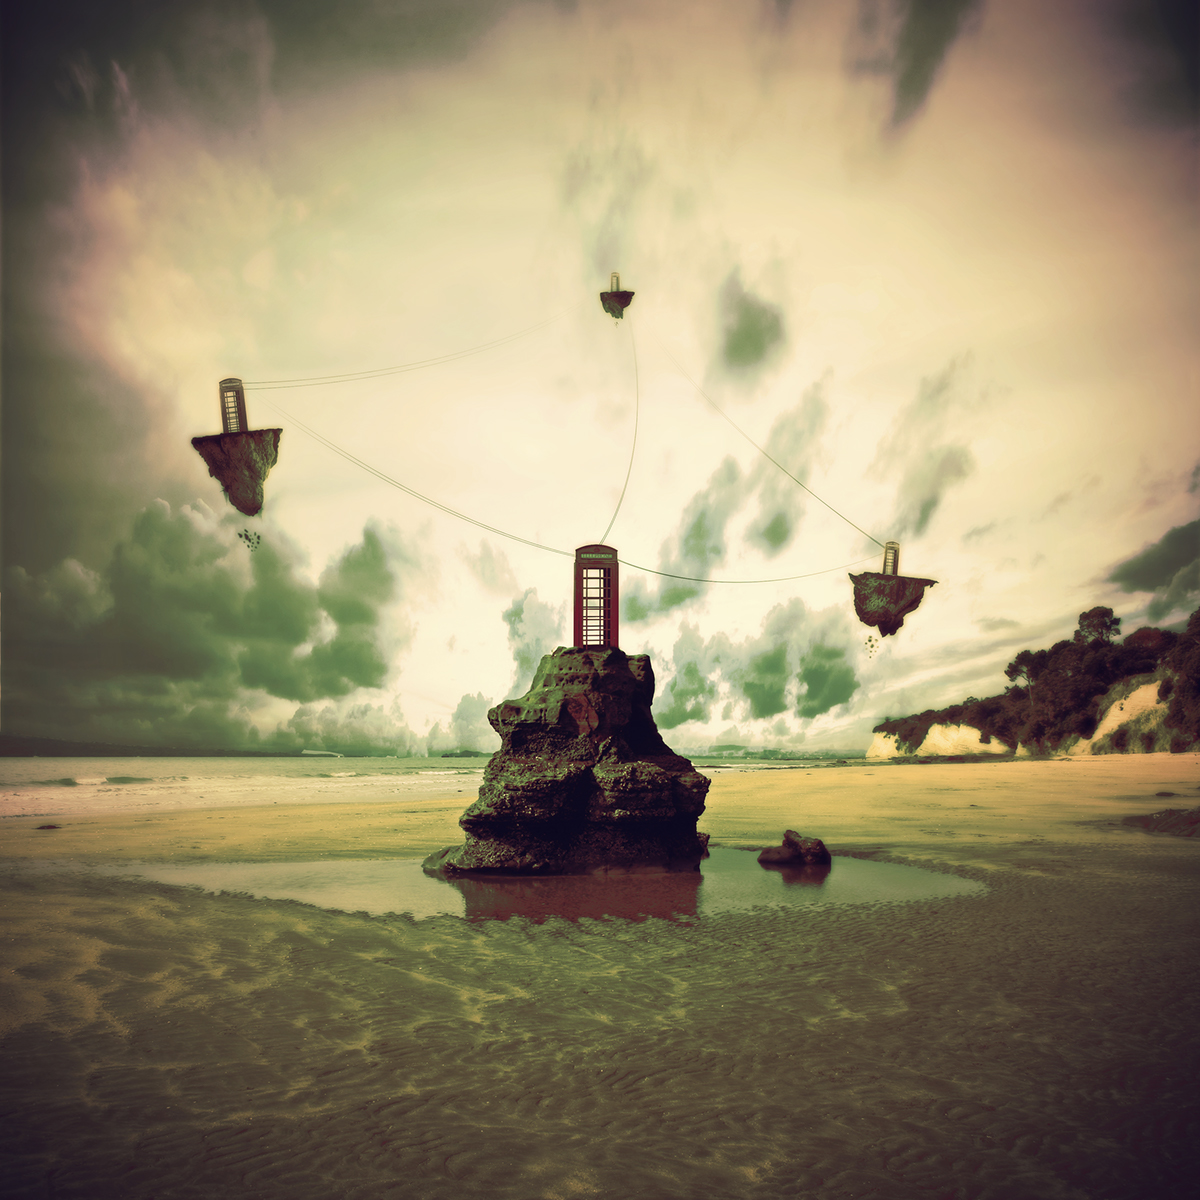 surreal surrealism clouds SKY water Ocean river narrative mountains photo manipulations story telephone storm fantasy relax